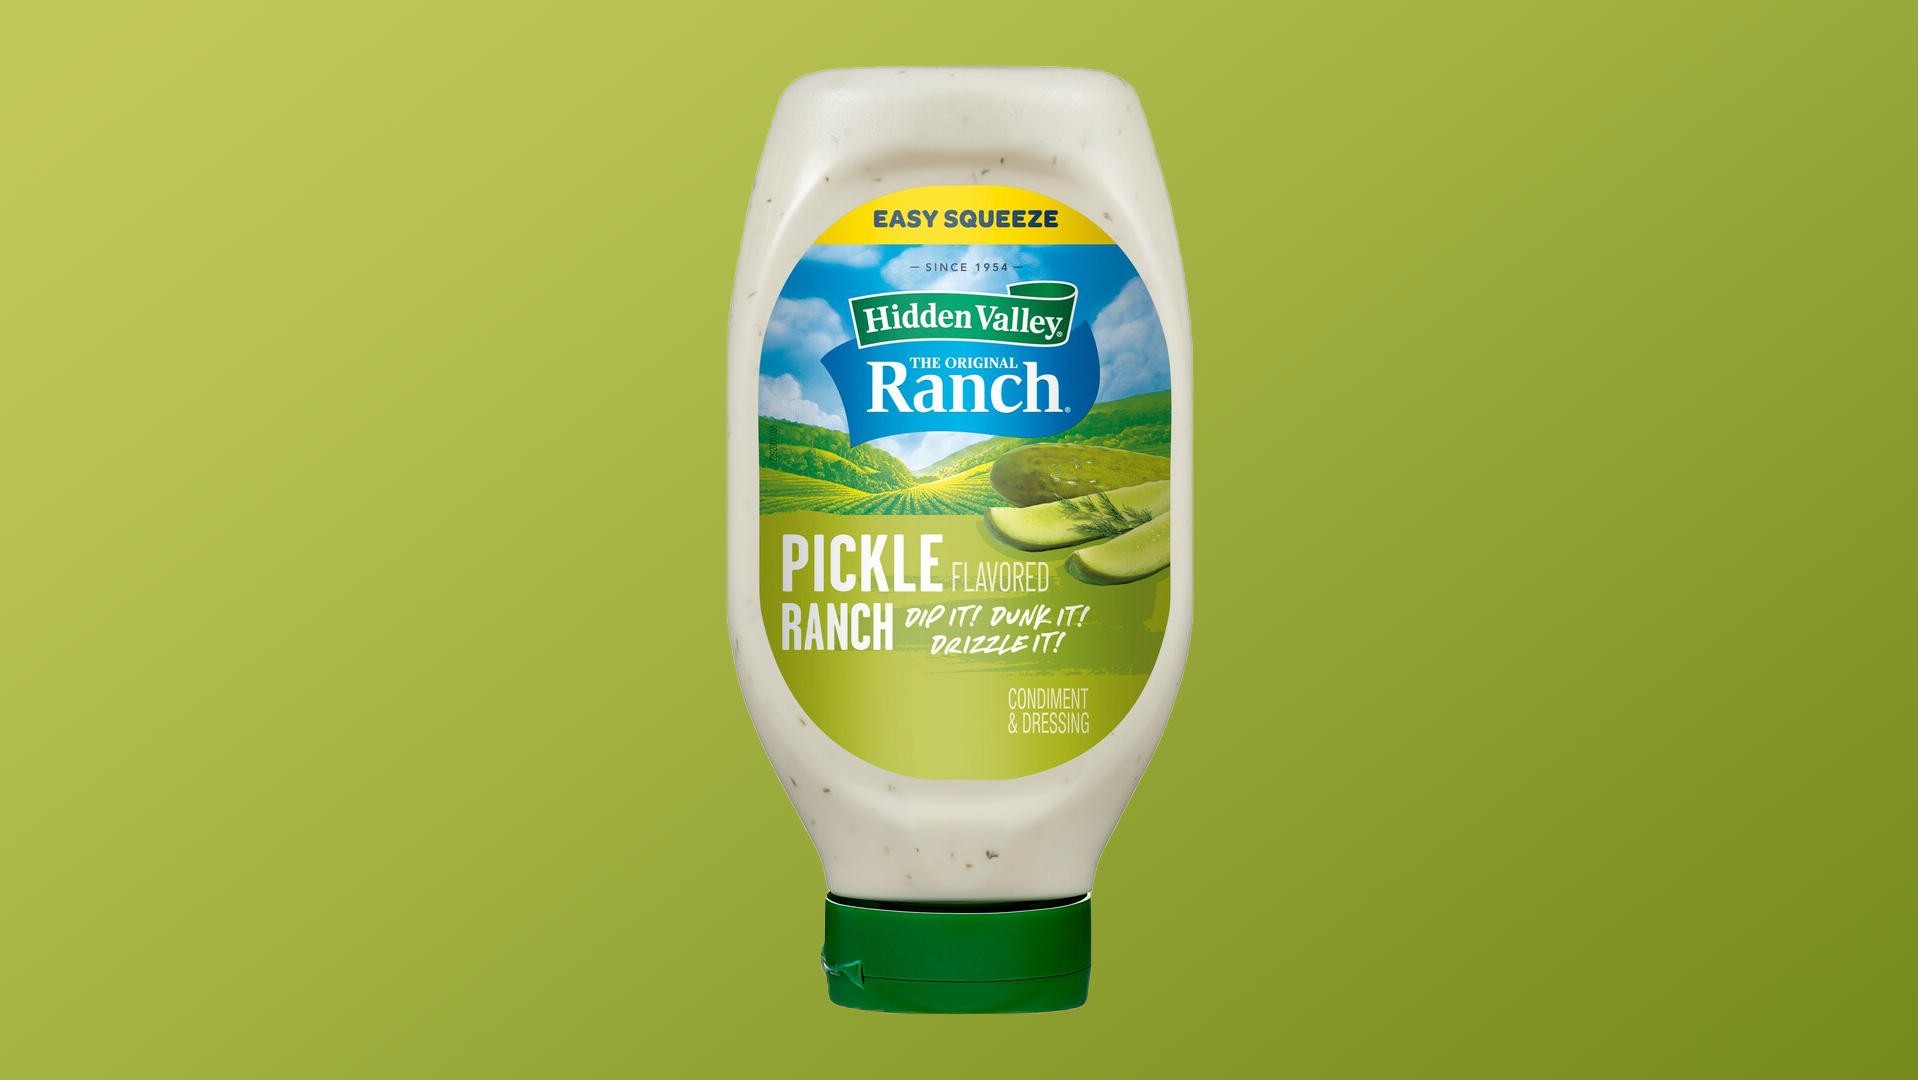 Hidden Valley Ranch Releases New Pickle-Flavored Ranch Dressing